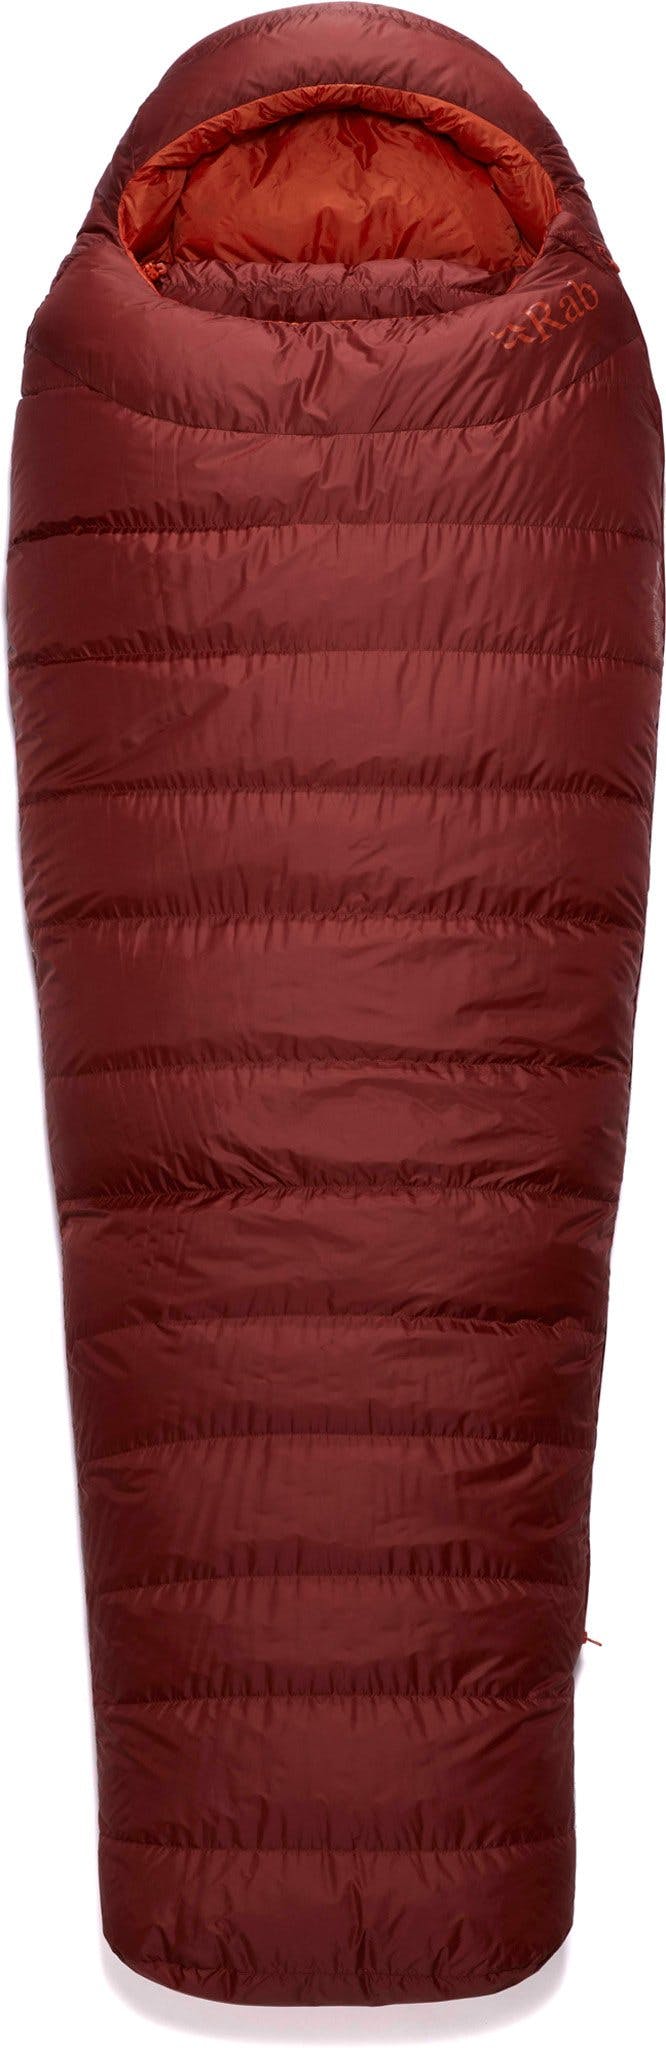 Product image for Ascent 900 Down Sleeping Bag -18C / 0F